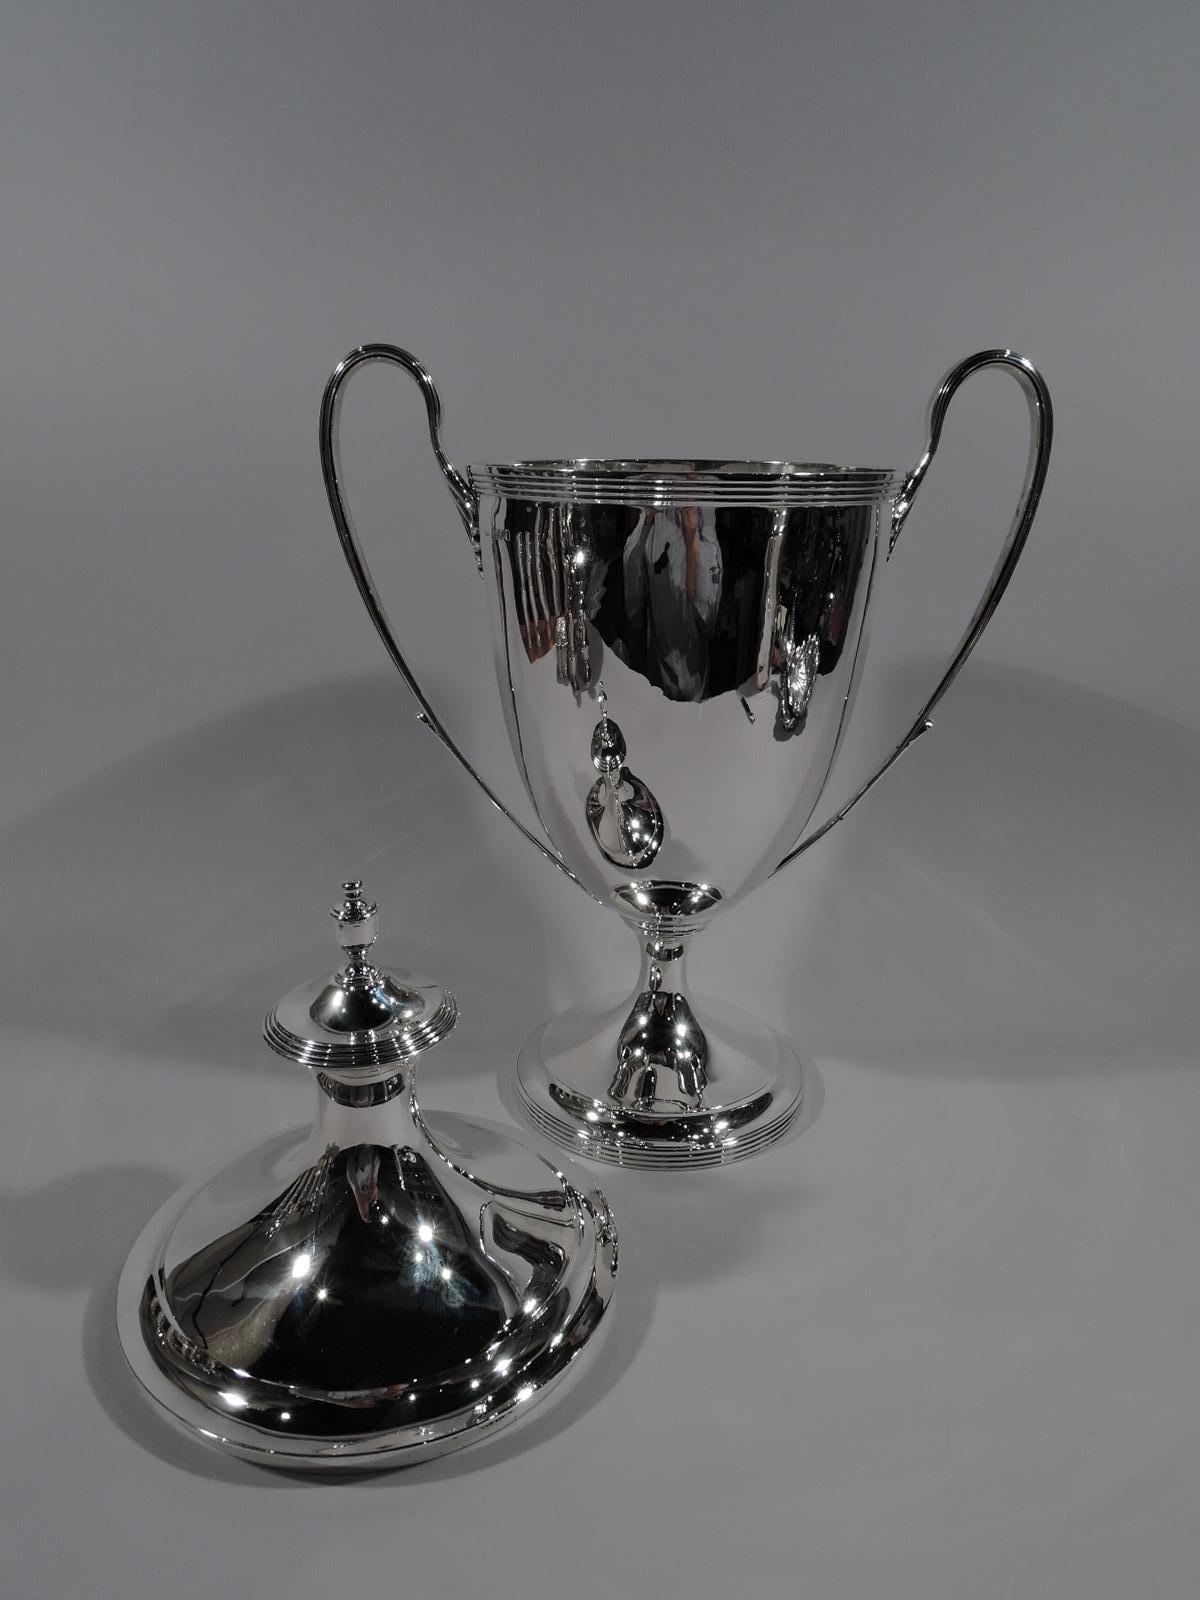 Large Edwardian Classical sterling silver trophy cup. Made by Lionel Alfred Crichton in London in 1911. Elegant Amphora with oval bowl on spool stem flowing into raised round foot. High-looping side handles with leaf mounts. Cover double domed with